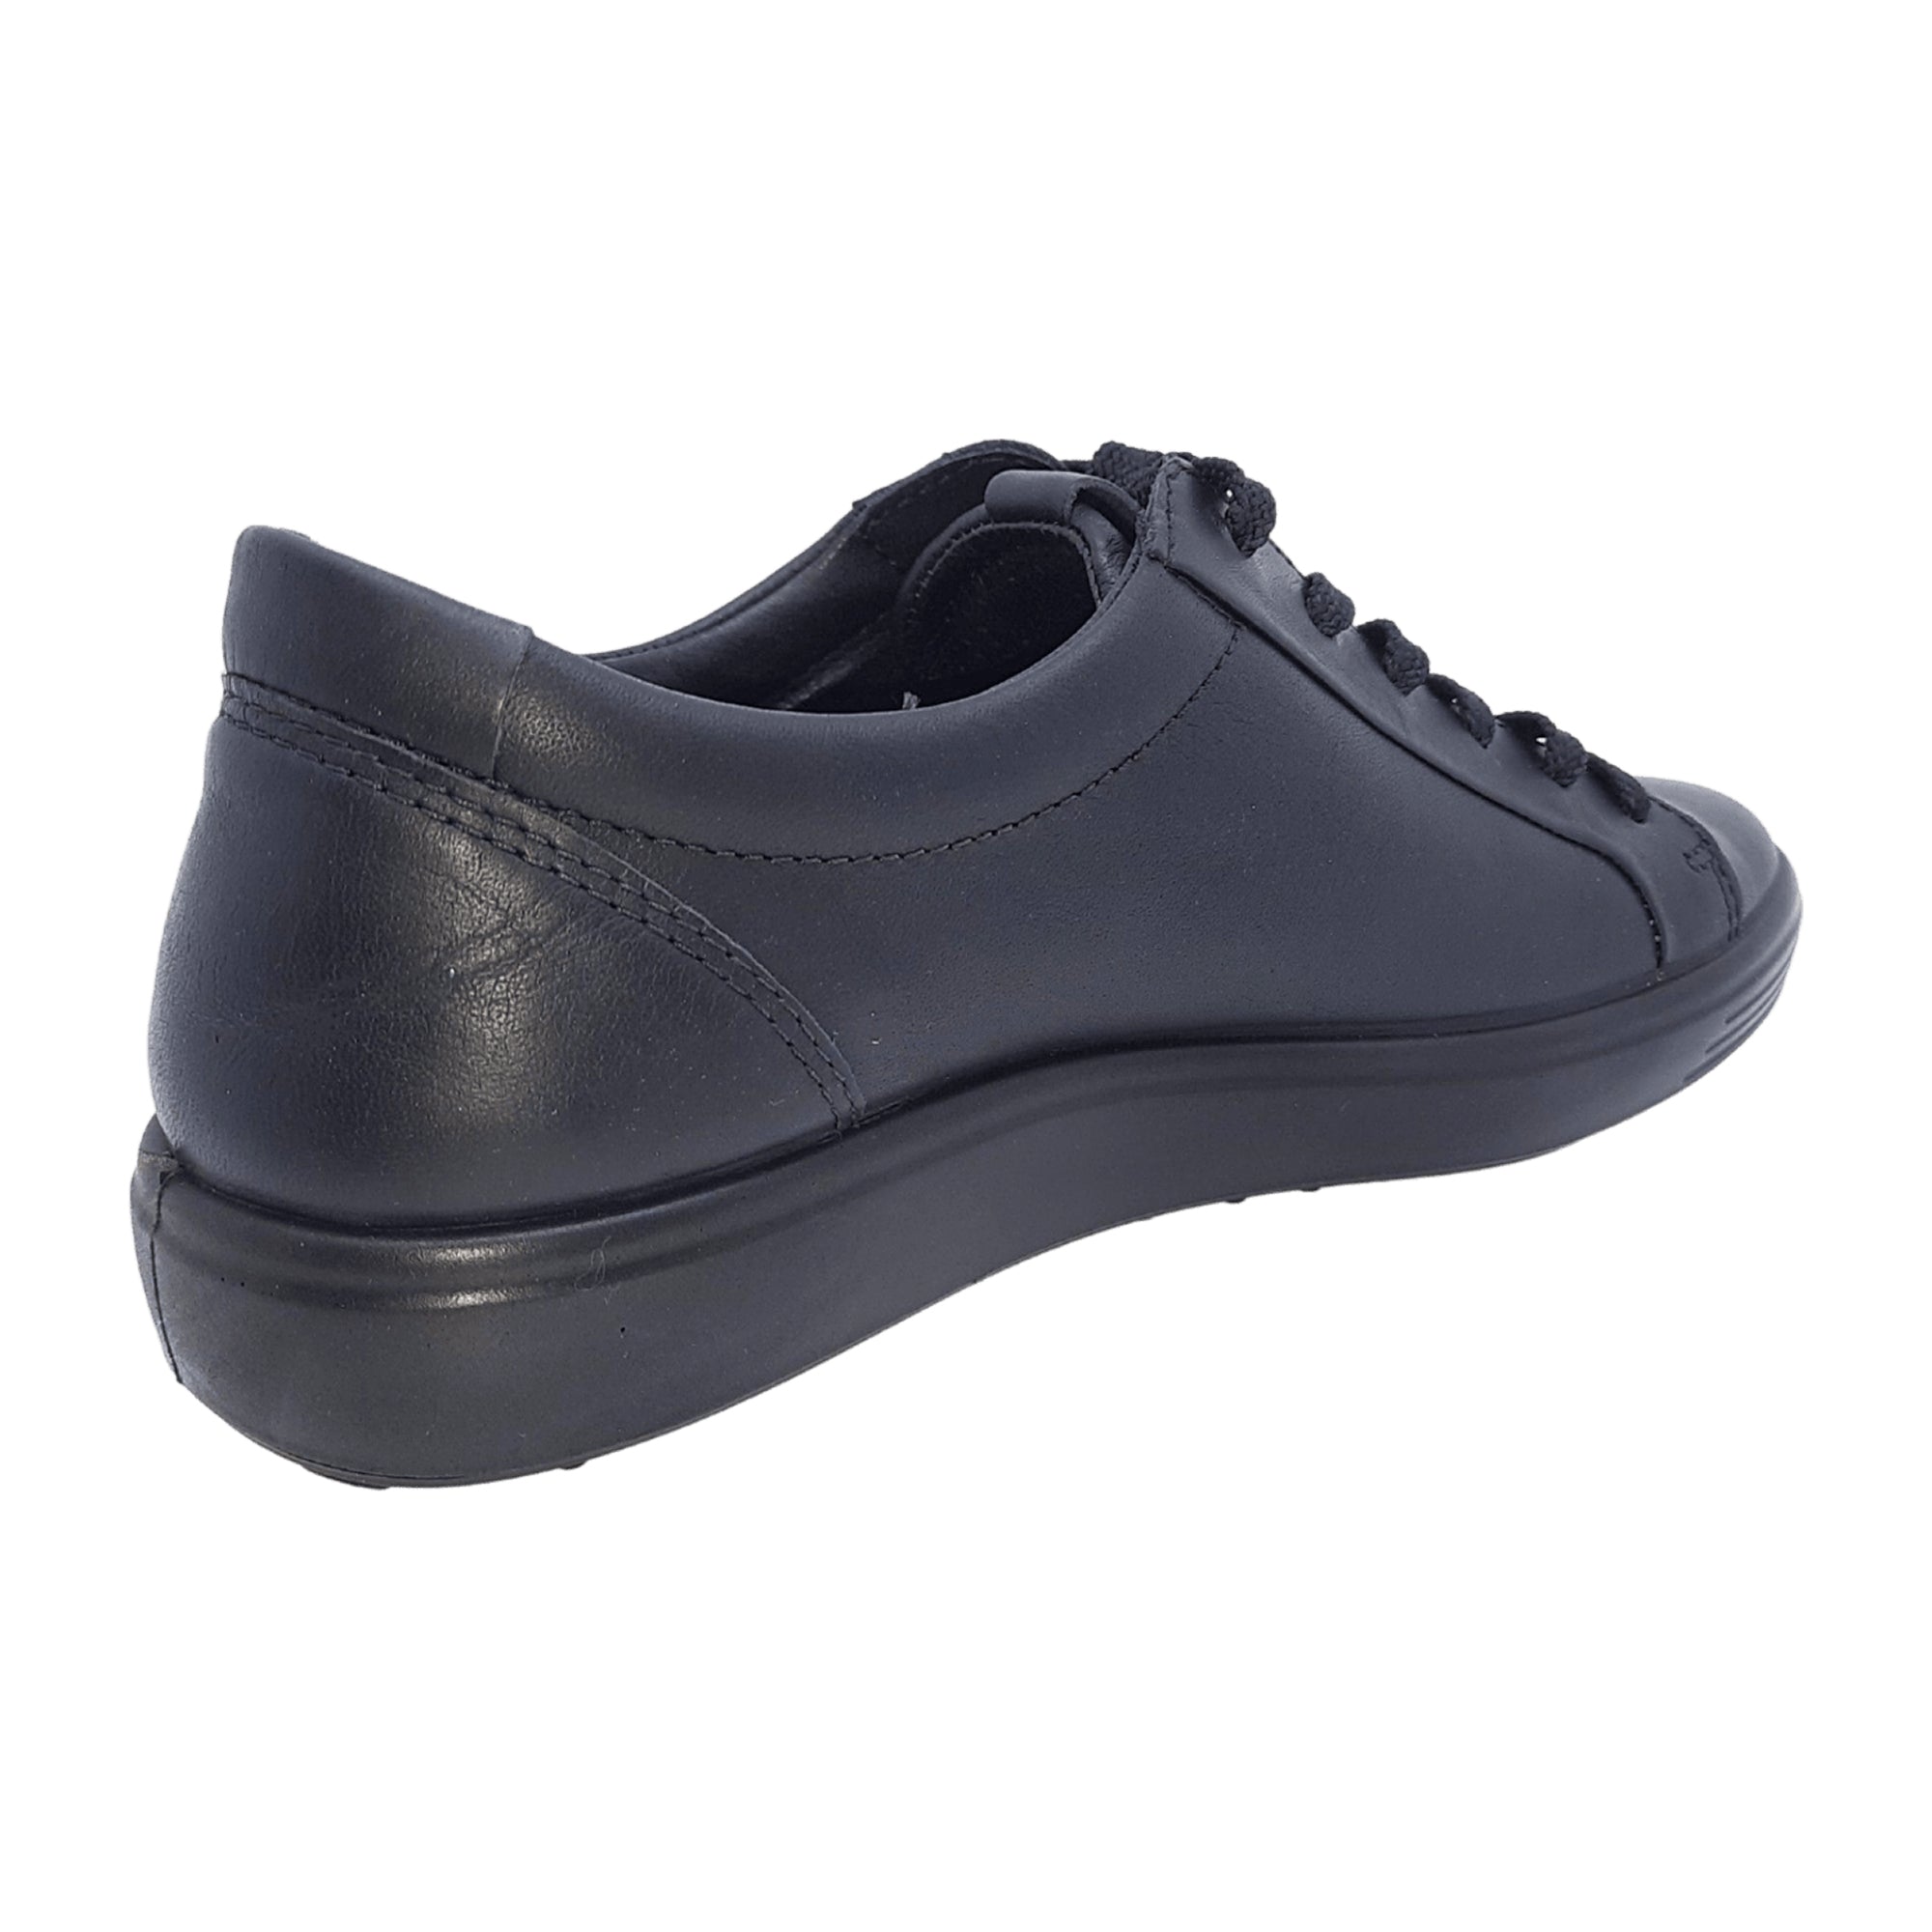 Ecco SOFT 7 Women's Black Leather Sneakers - Comfortable & Durable